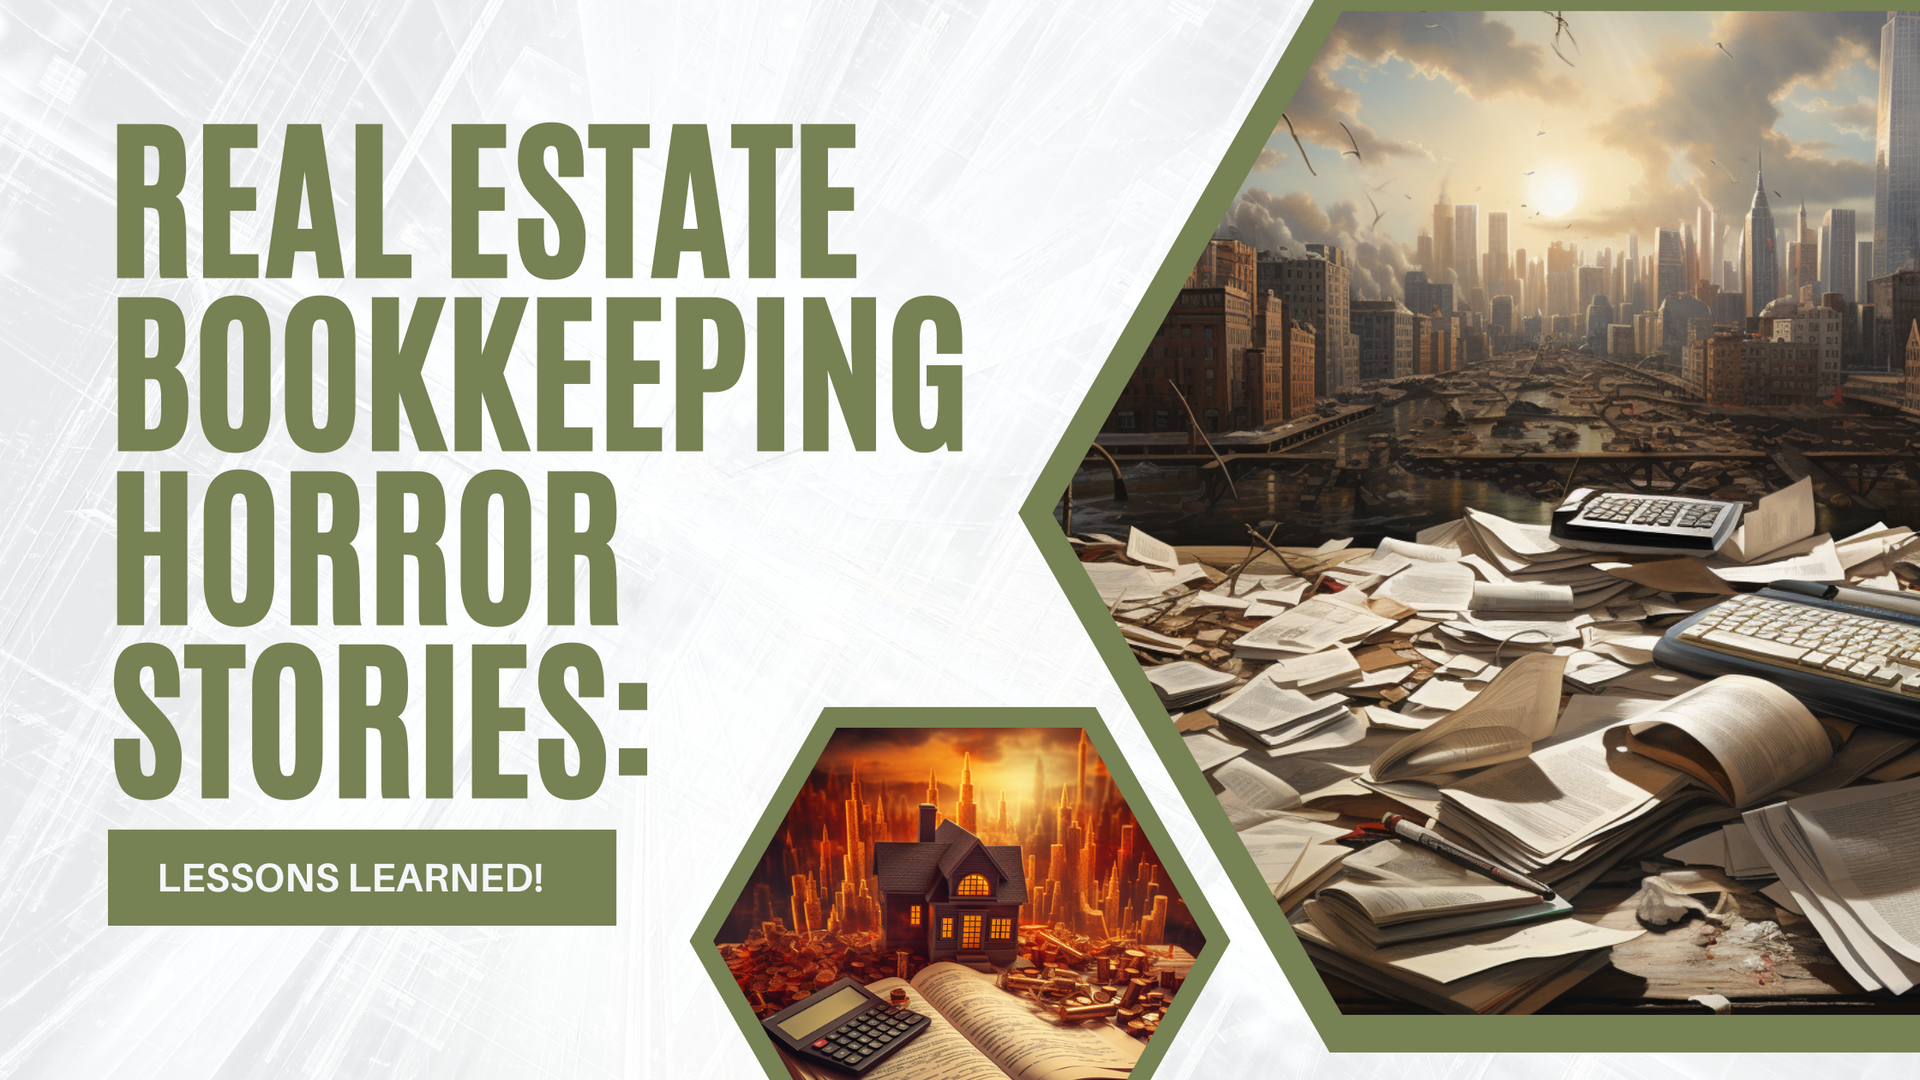 Real-Estate-Bookkeeping-Horror-Stories-Lessons-Learned!